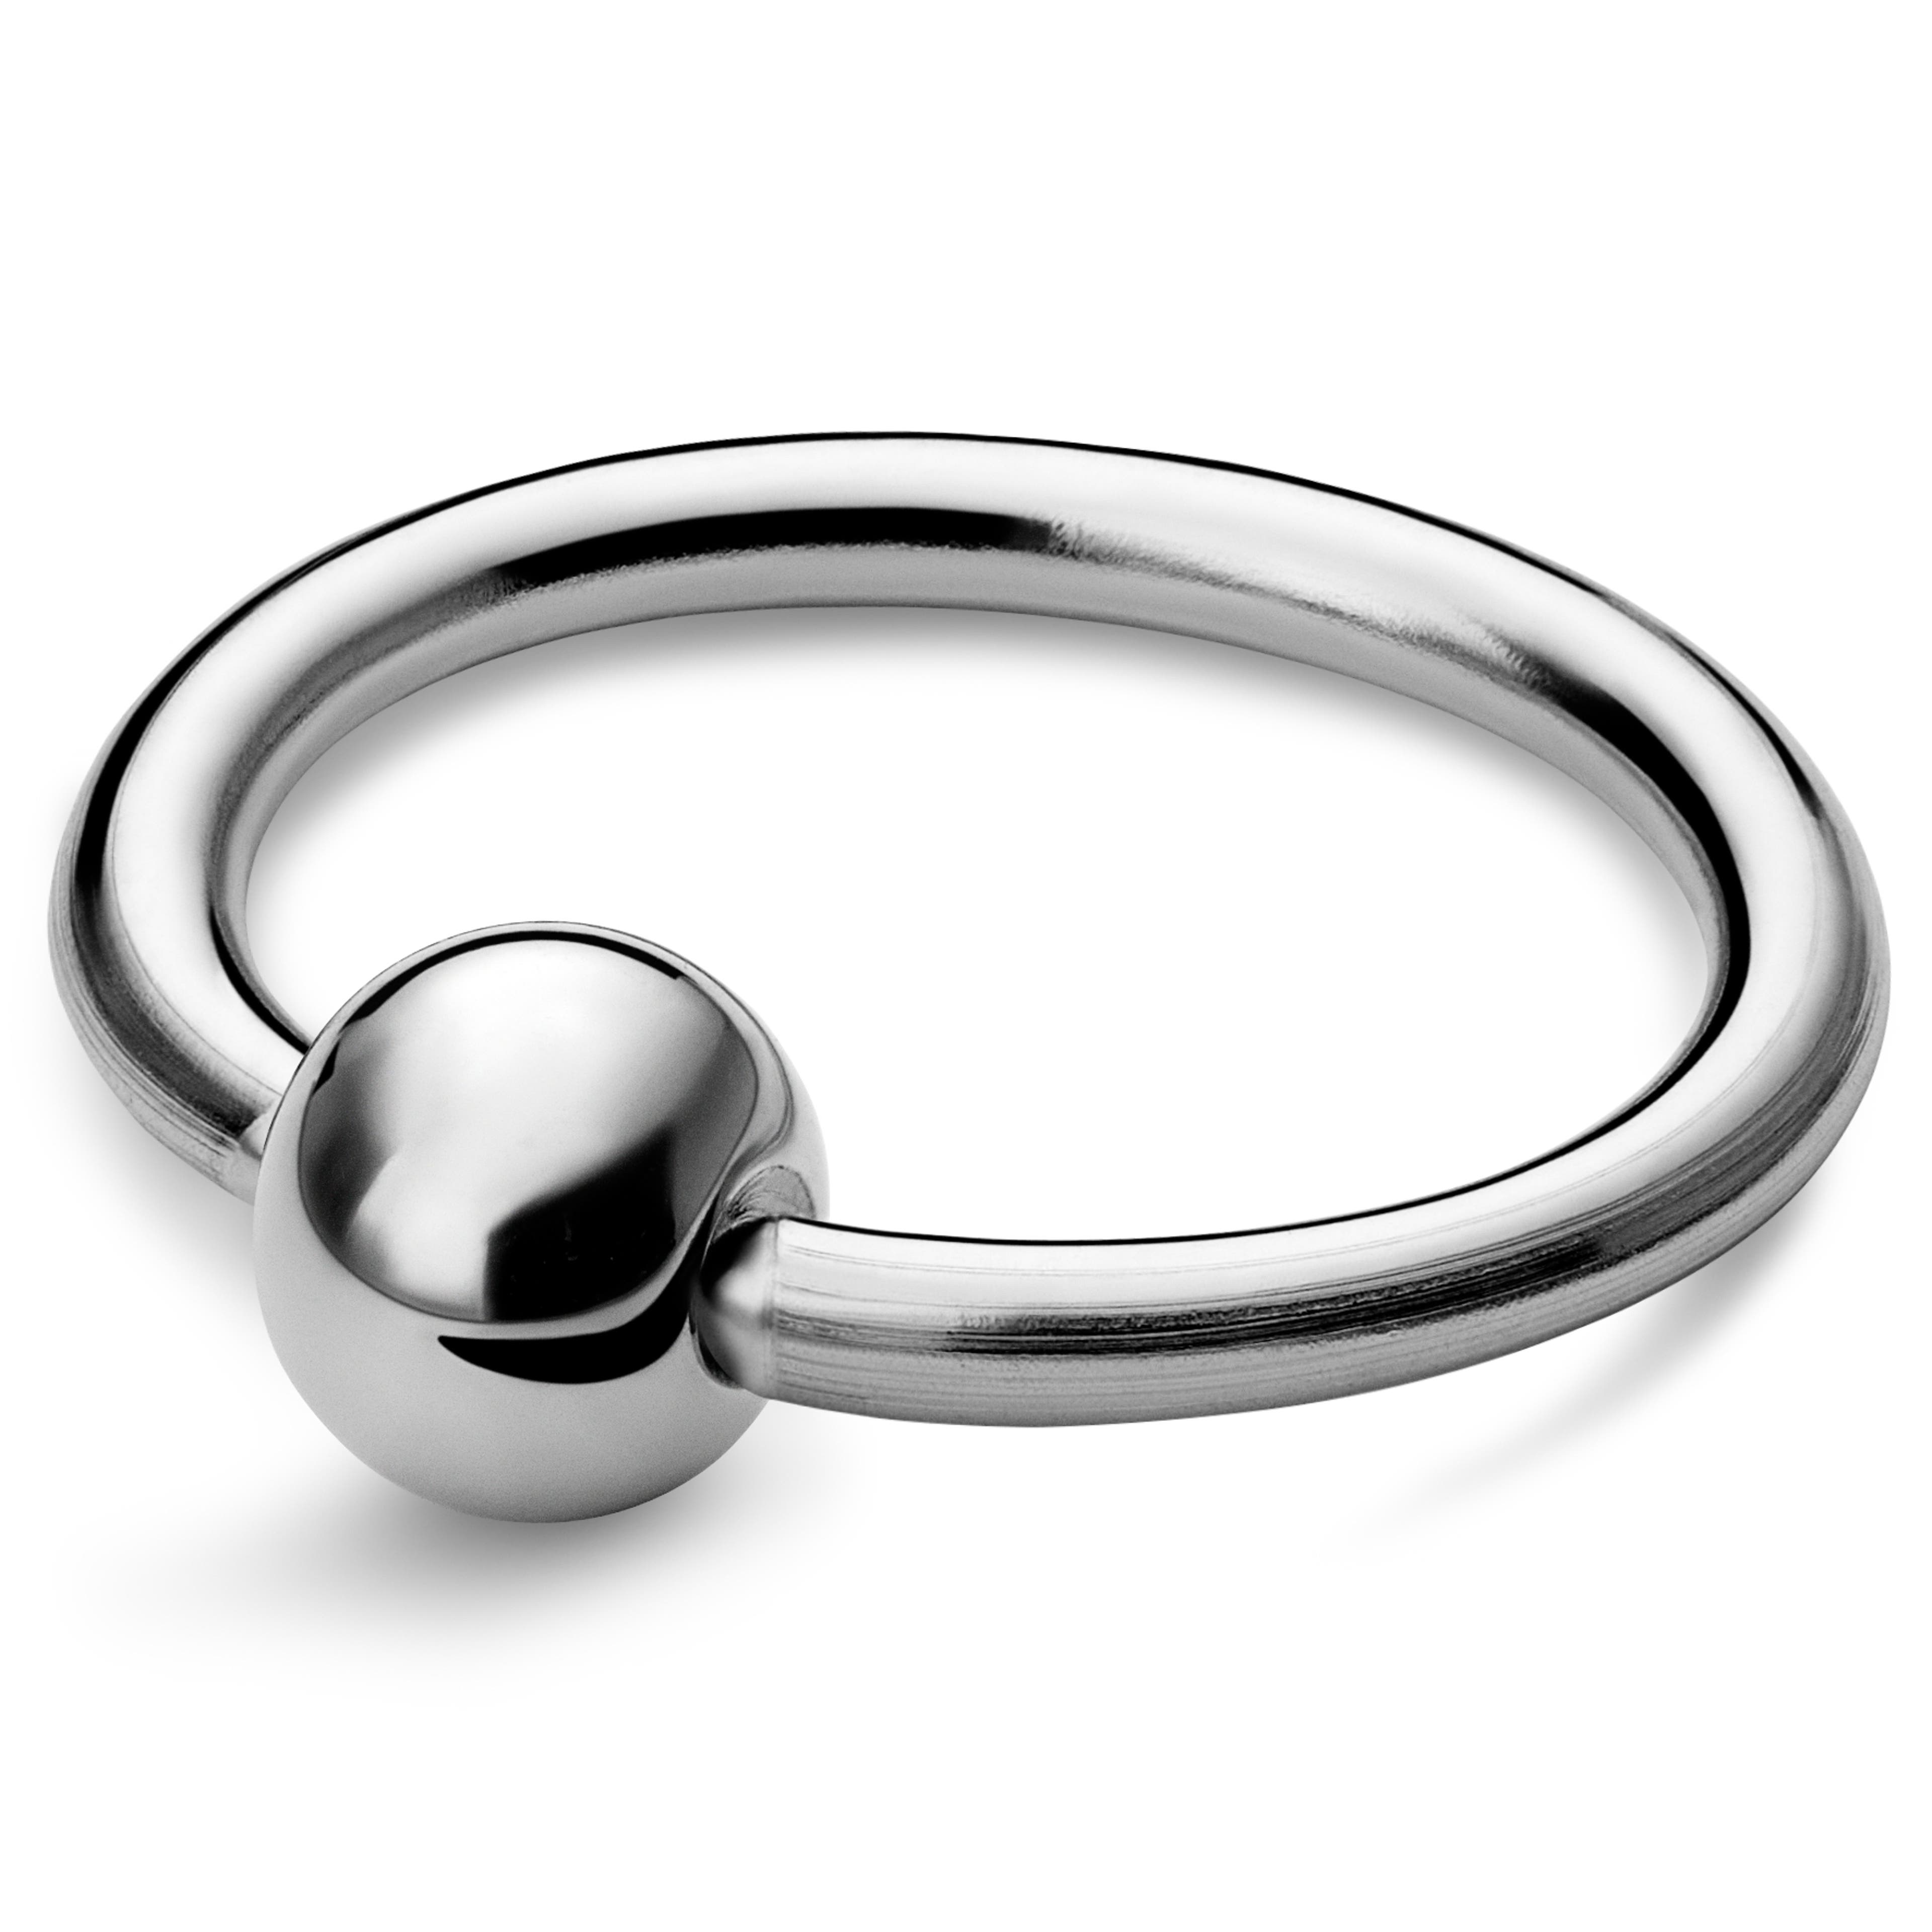 10 mm Silver-Tone Surgical Steel Captive Bead Ring